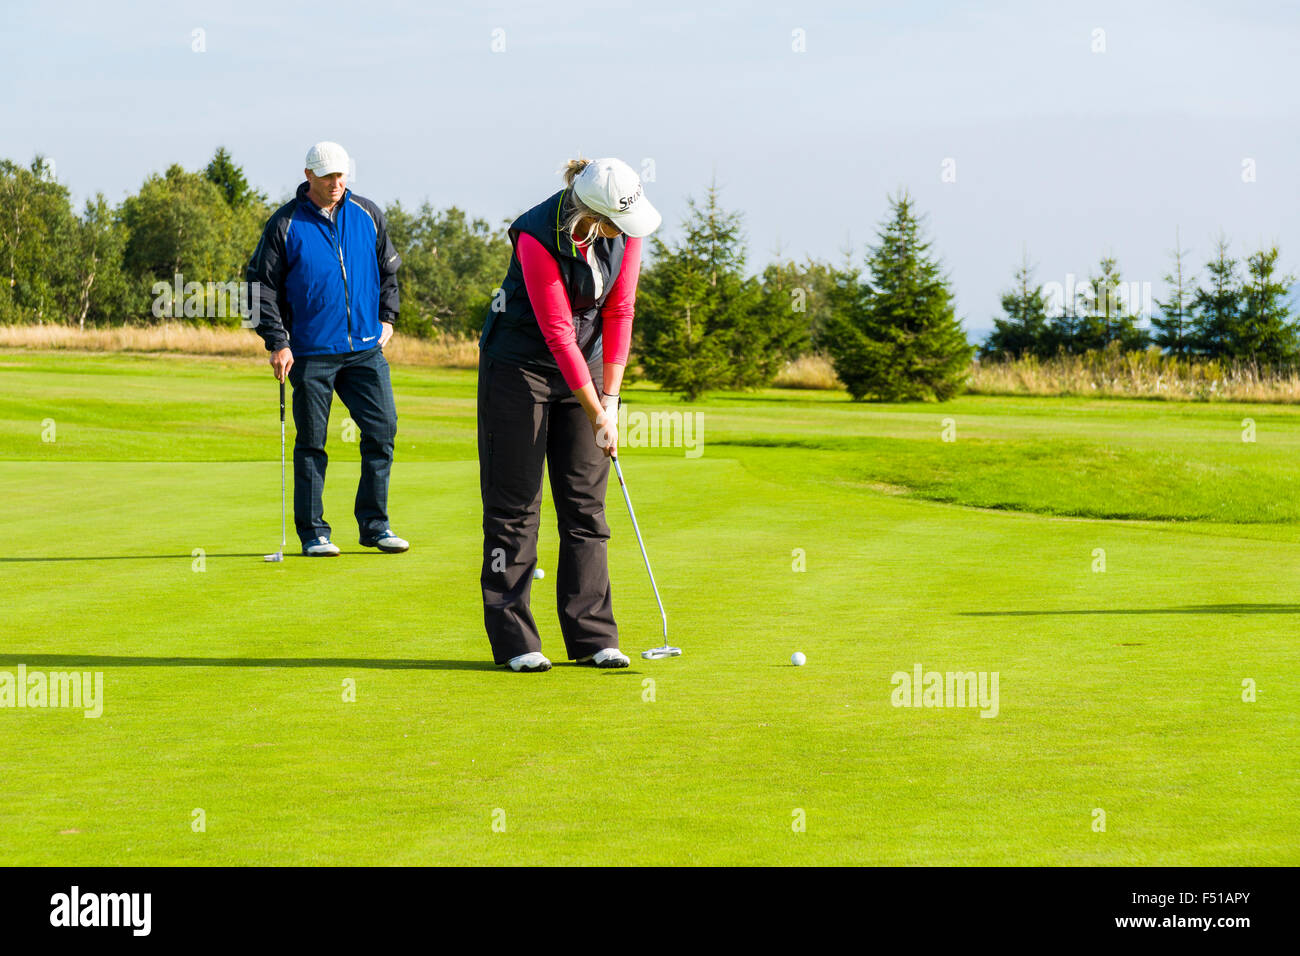 A man and a woman are playing golf on a green meadow Stock Photo